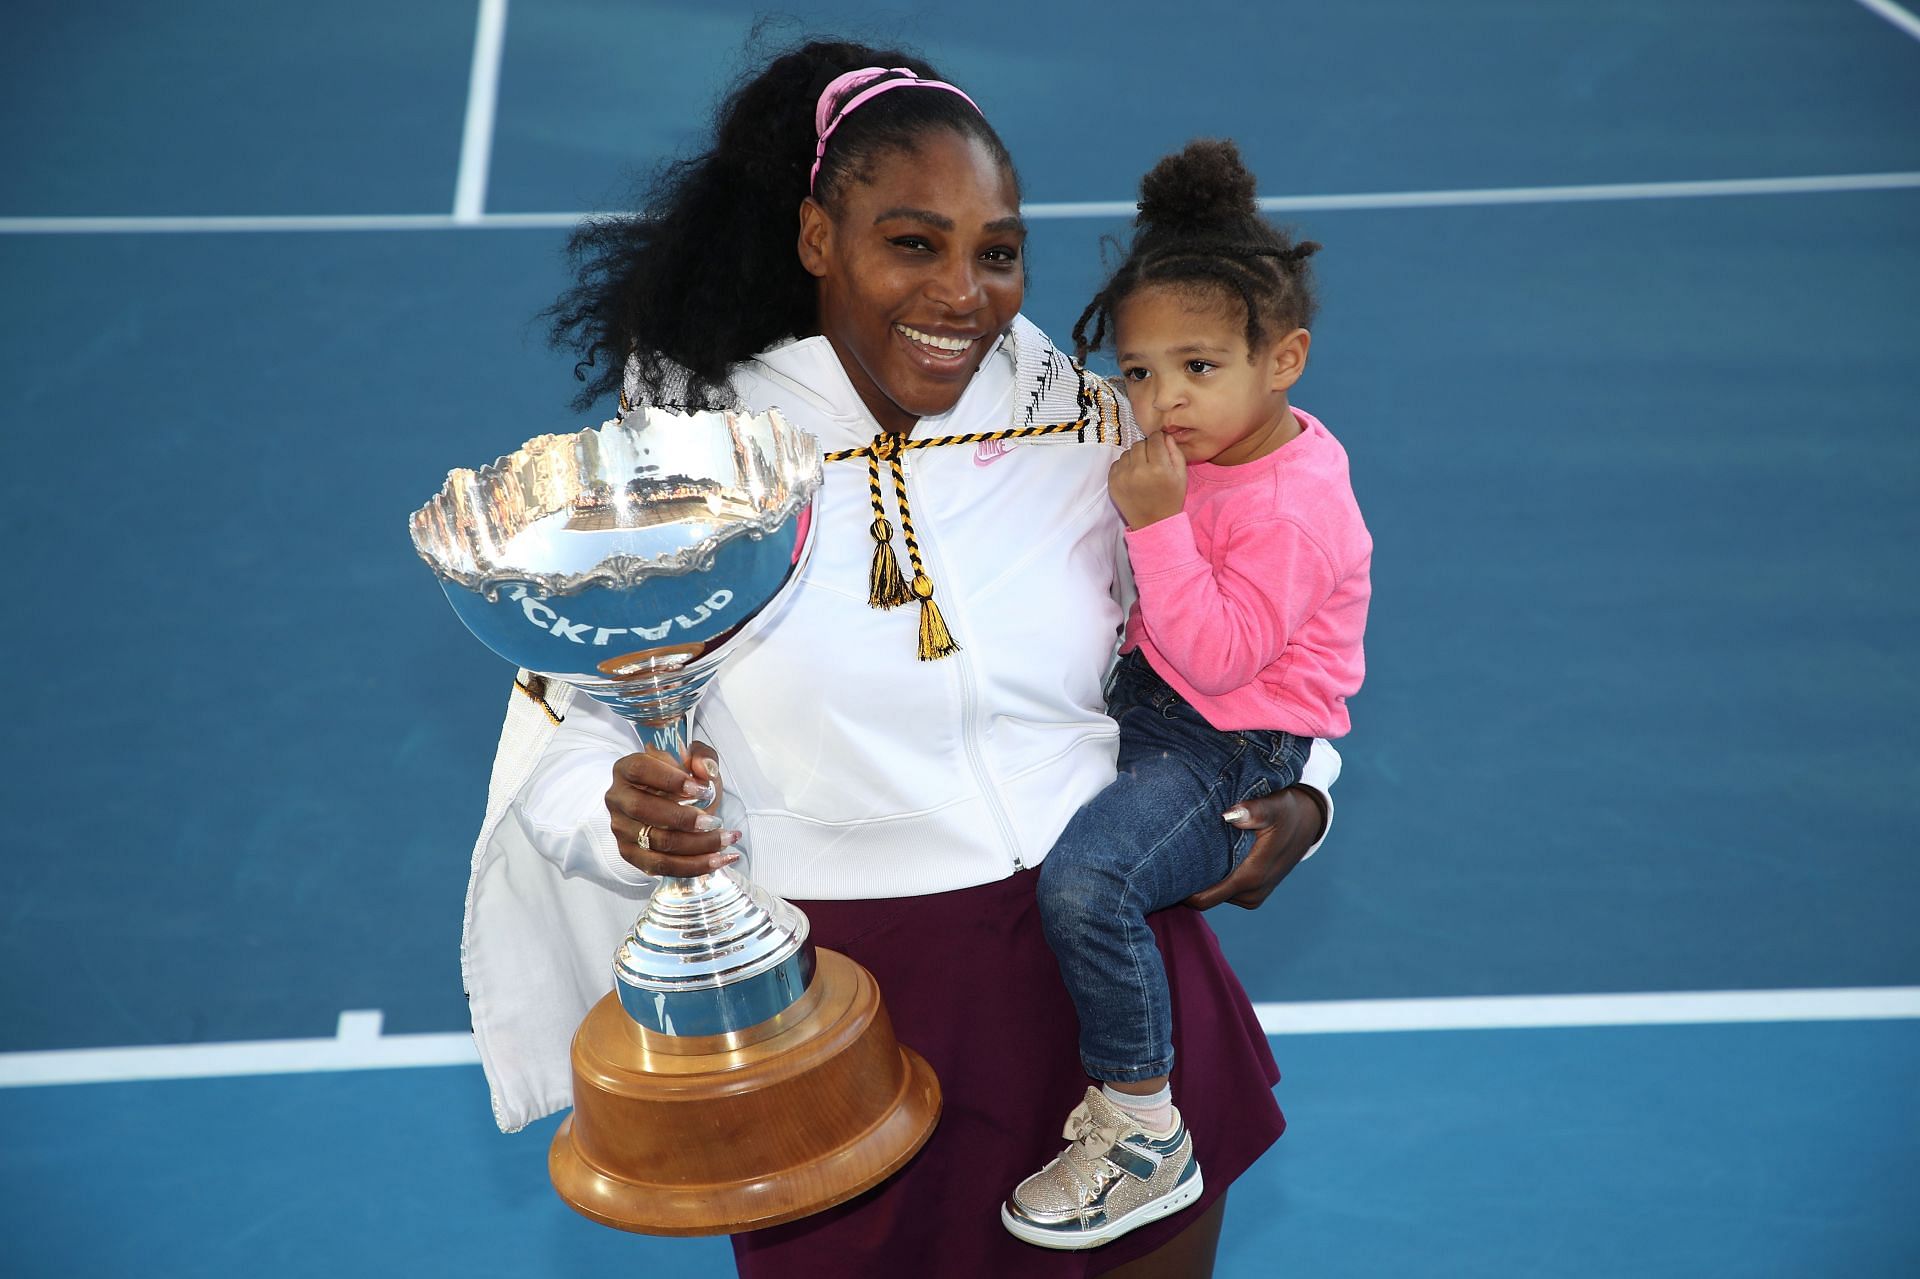 Williams and her daughter Olympia at the ASB Classic 2020